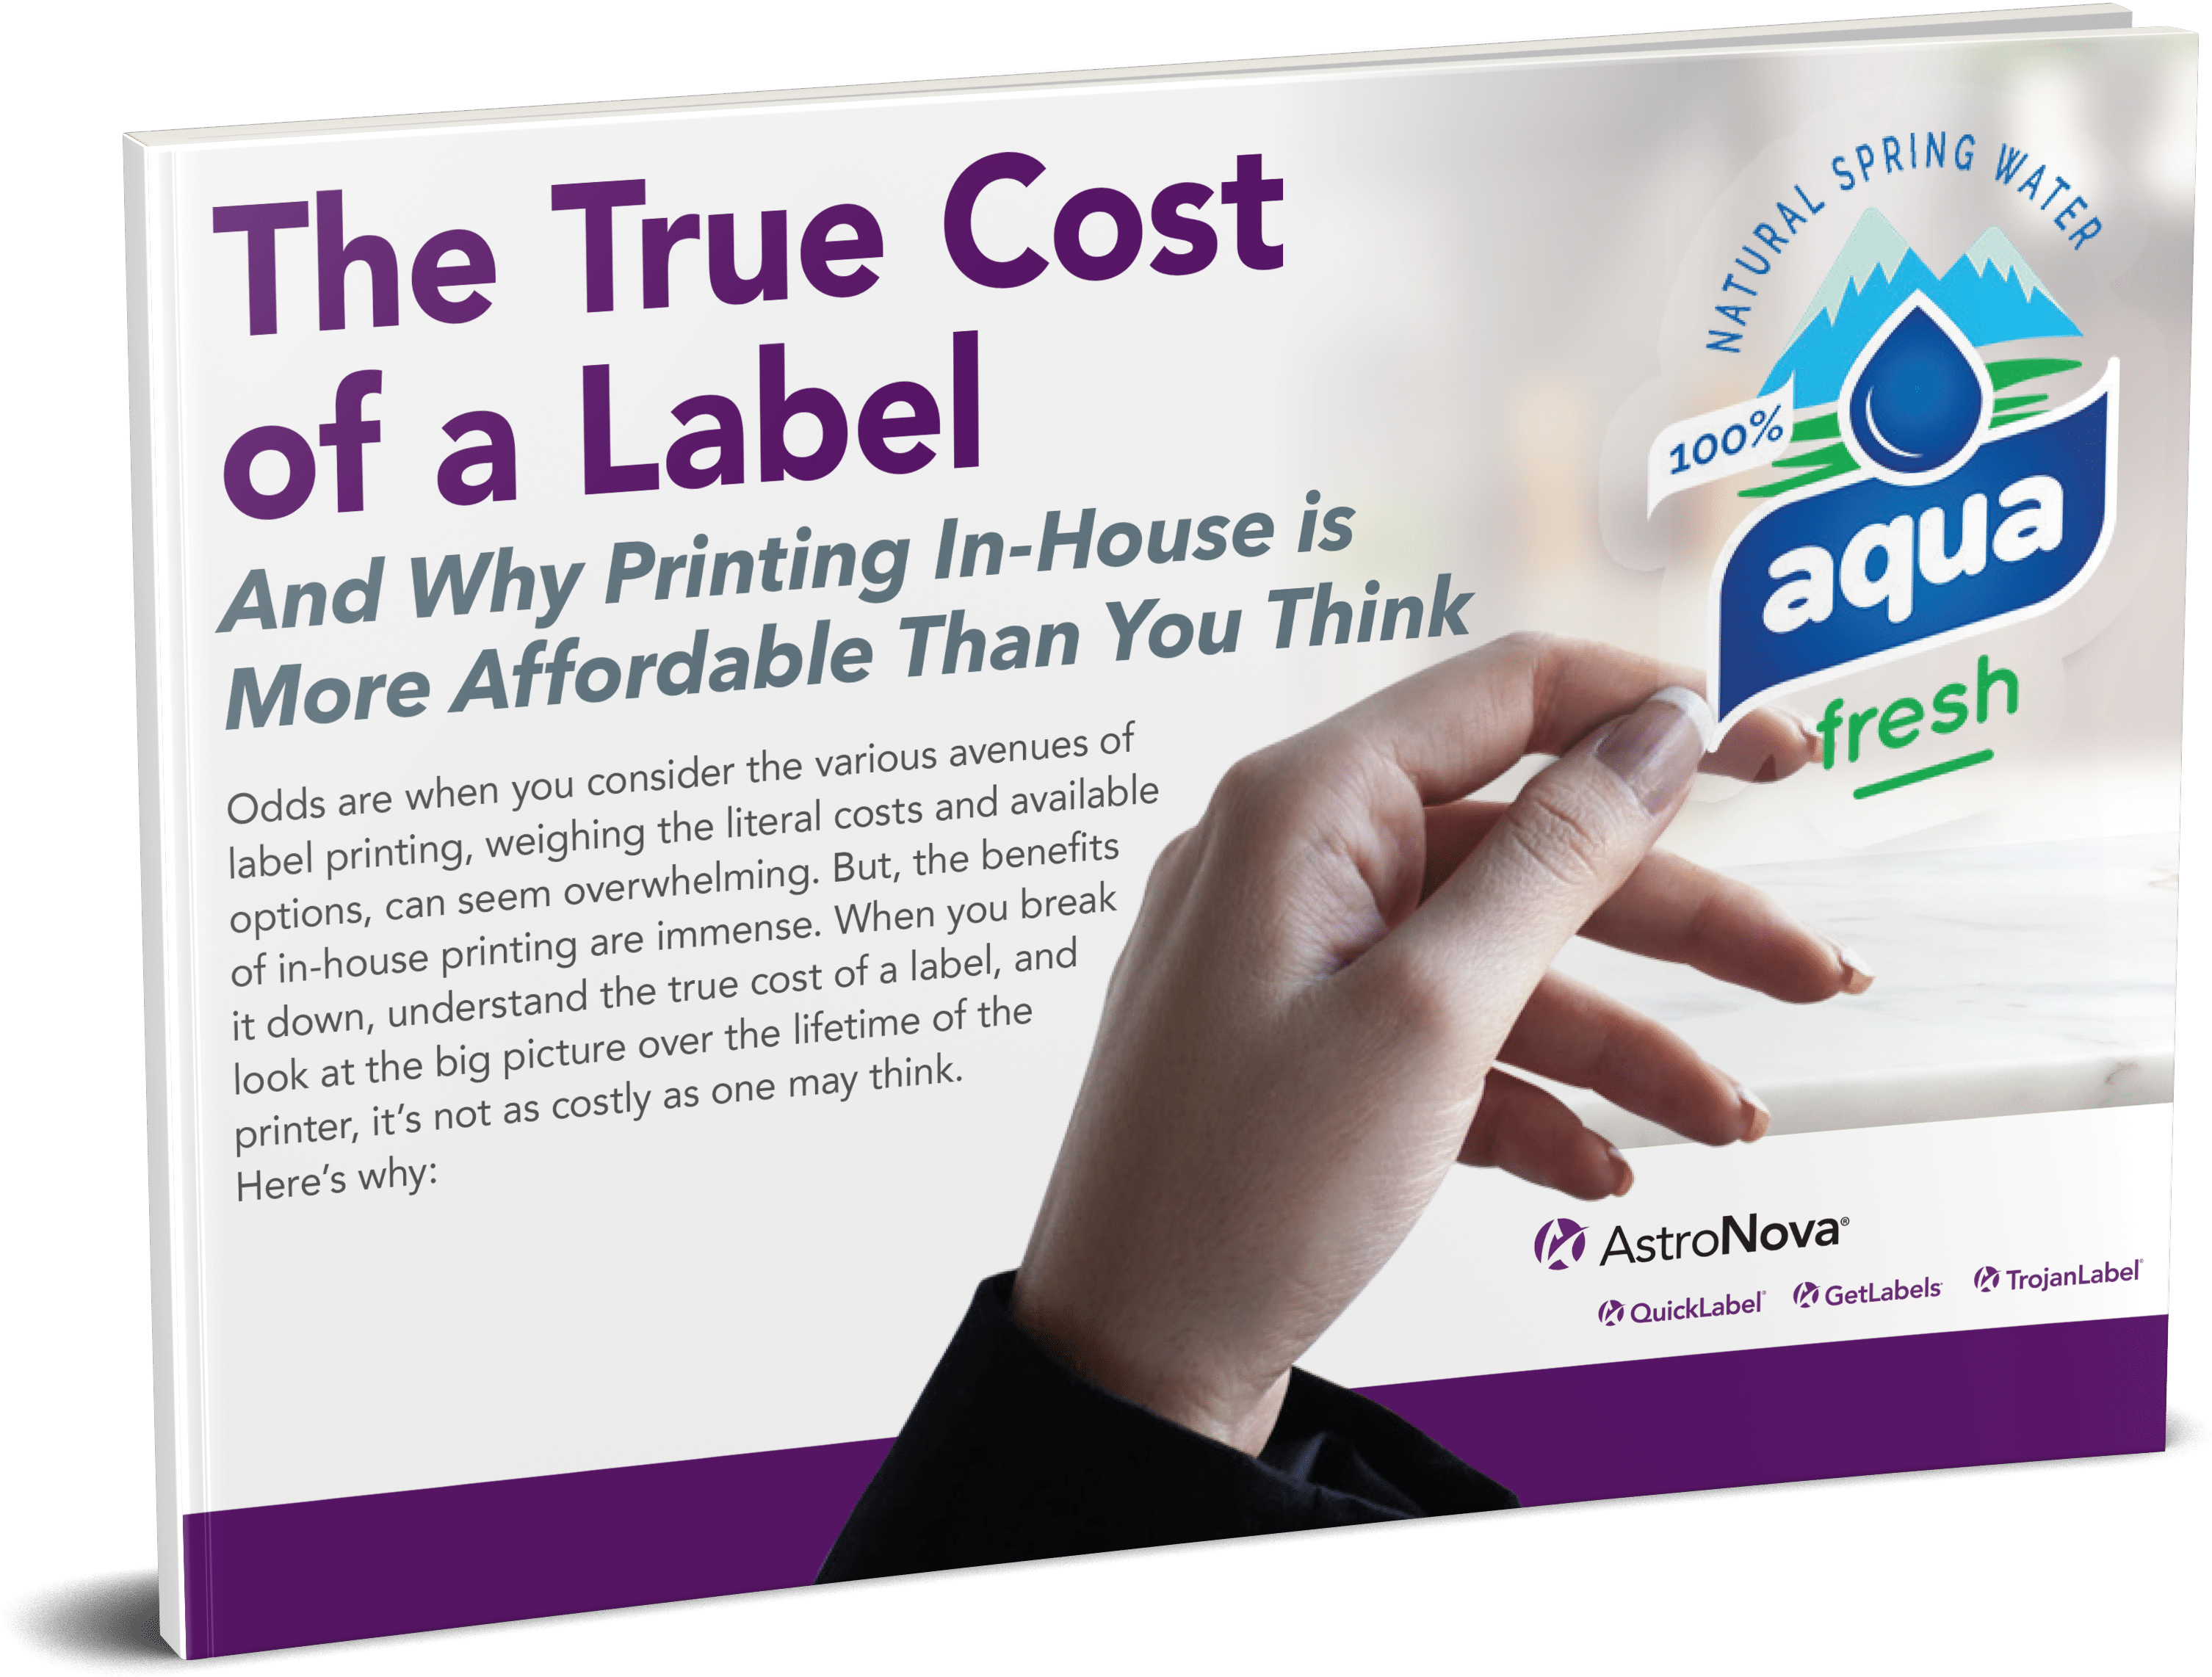 The True Cost of a Label